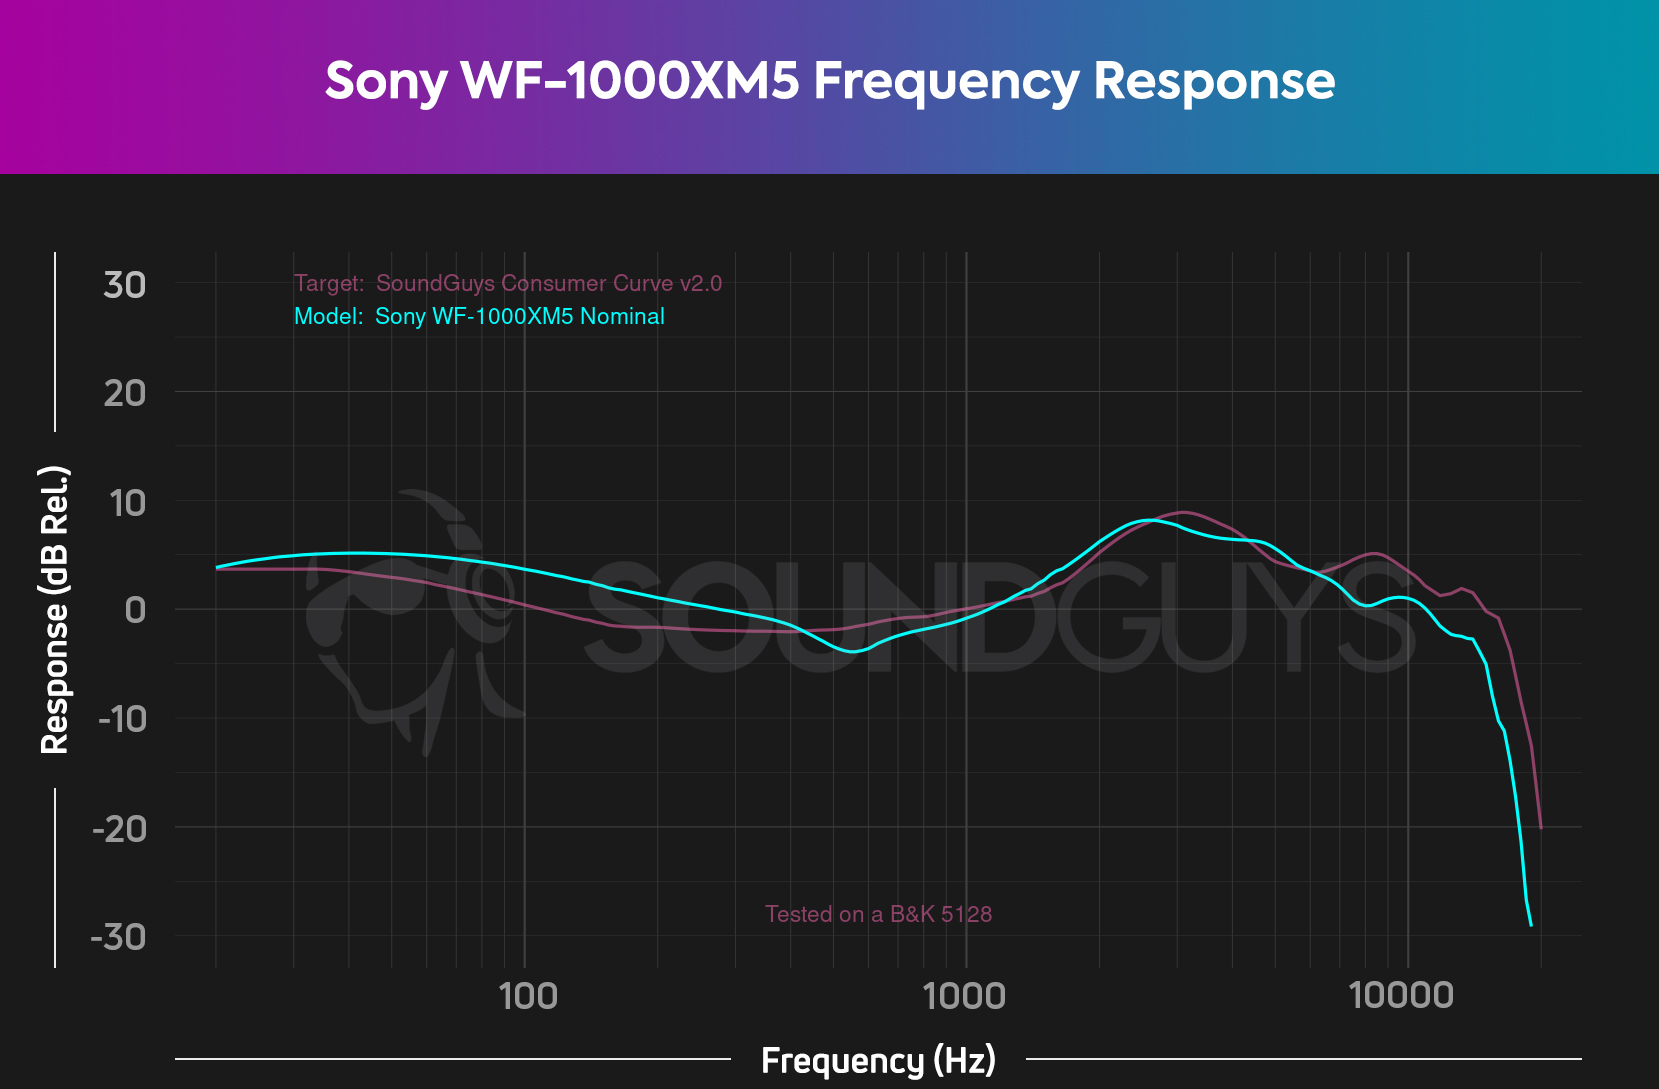 A chart depicts the Sony WF-1000XM5 frequency response which has a bit more bass than the SoundGuys Headphone Preference Curve recommends.